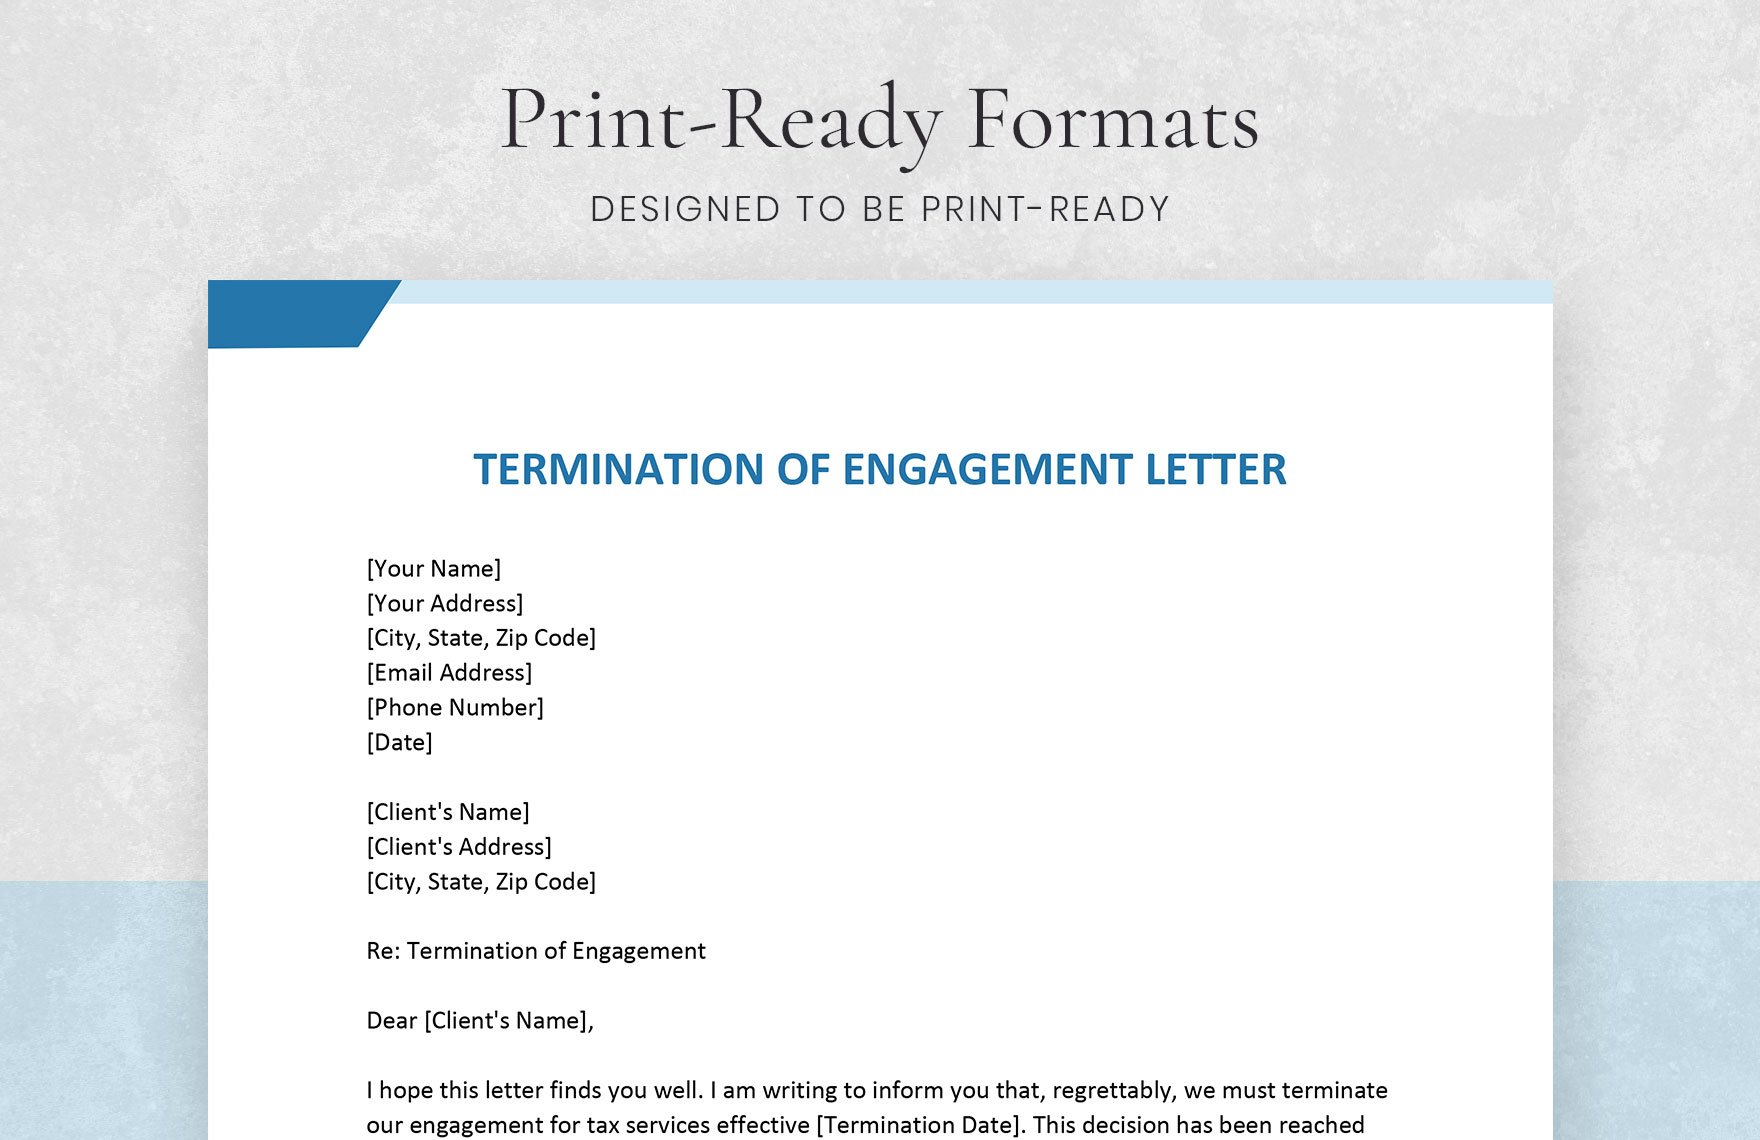 Termination of Engagement Letter